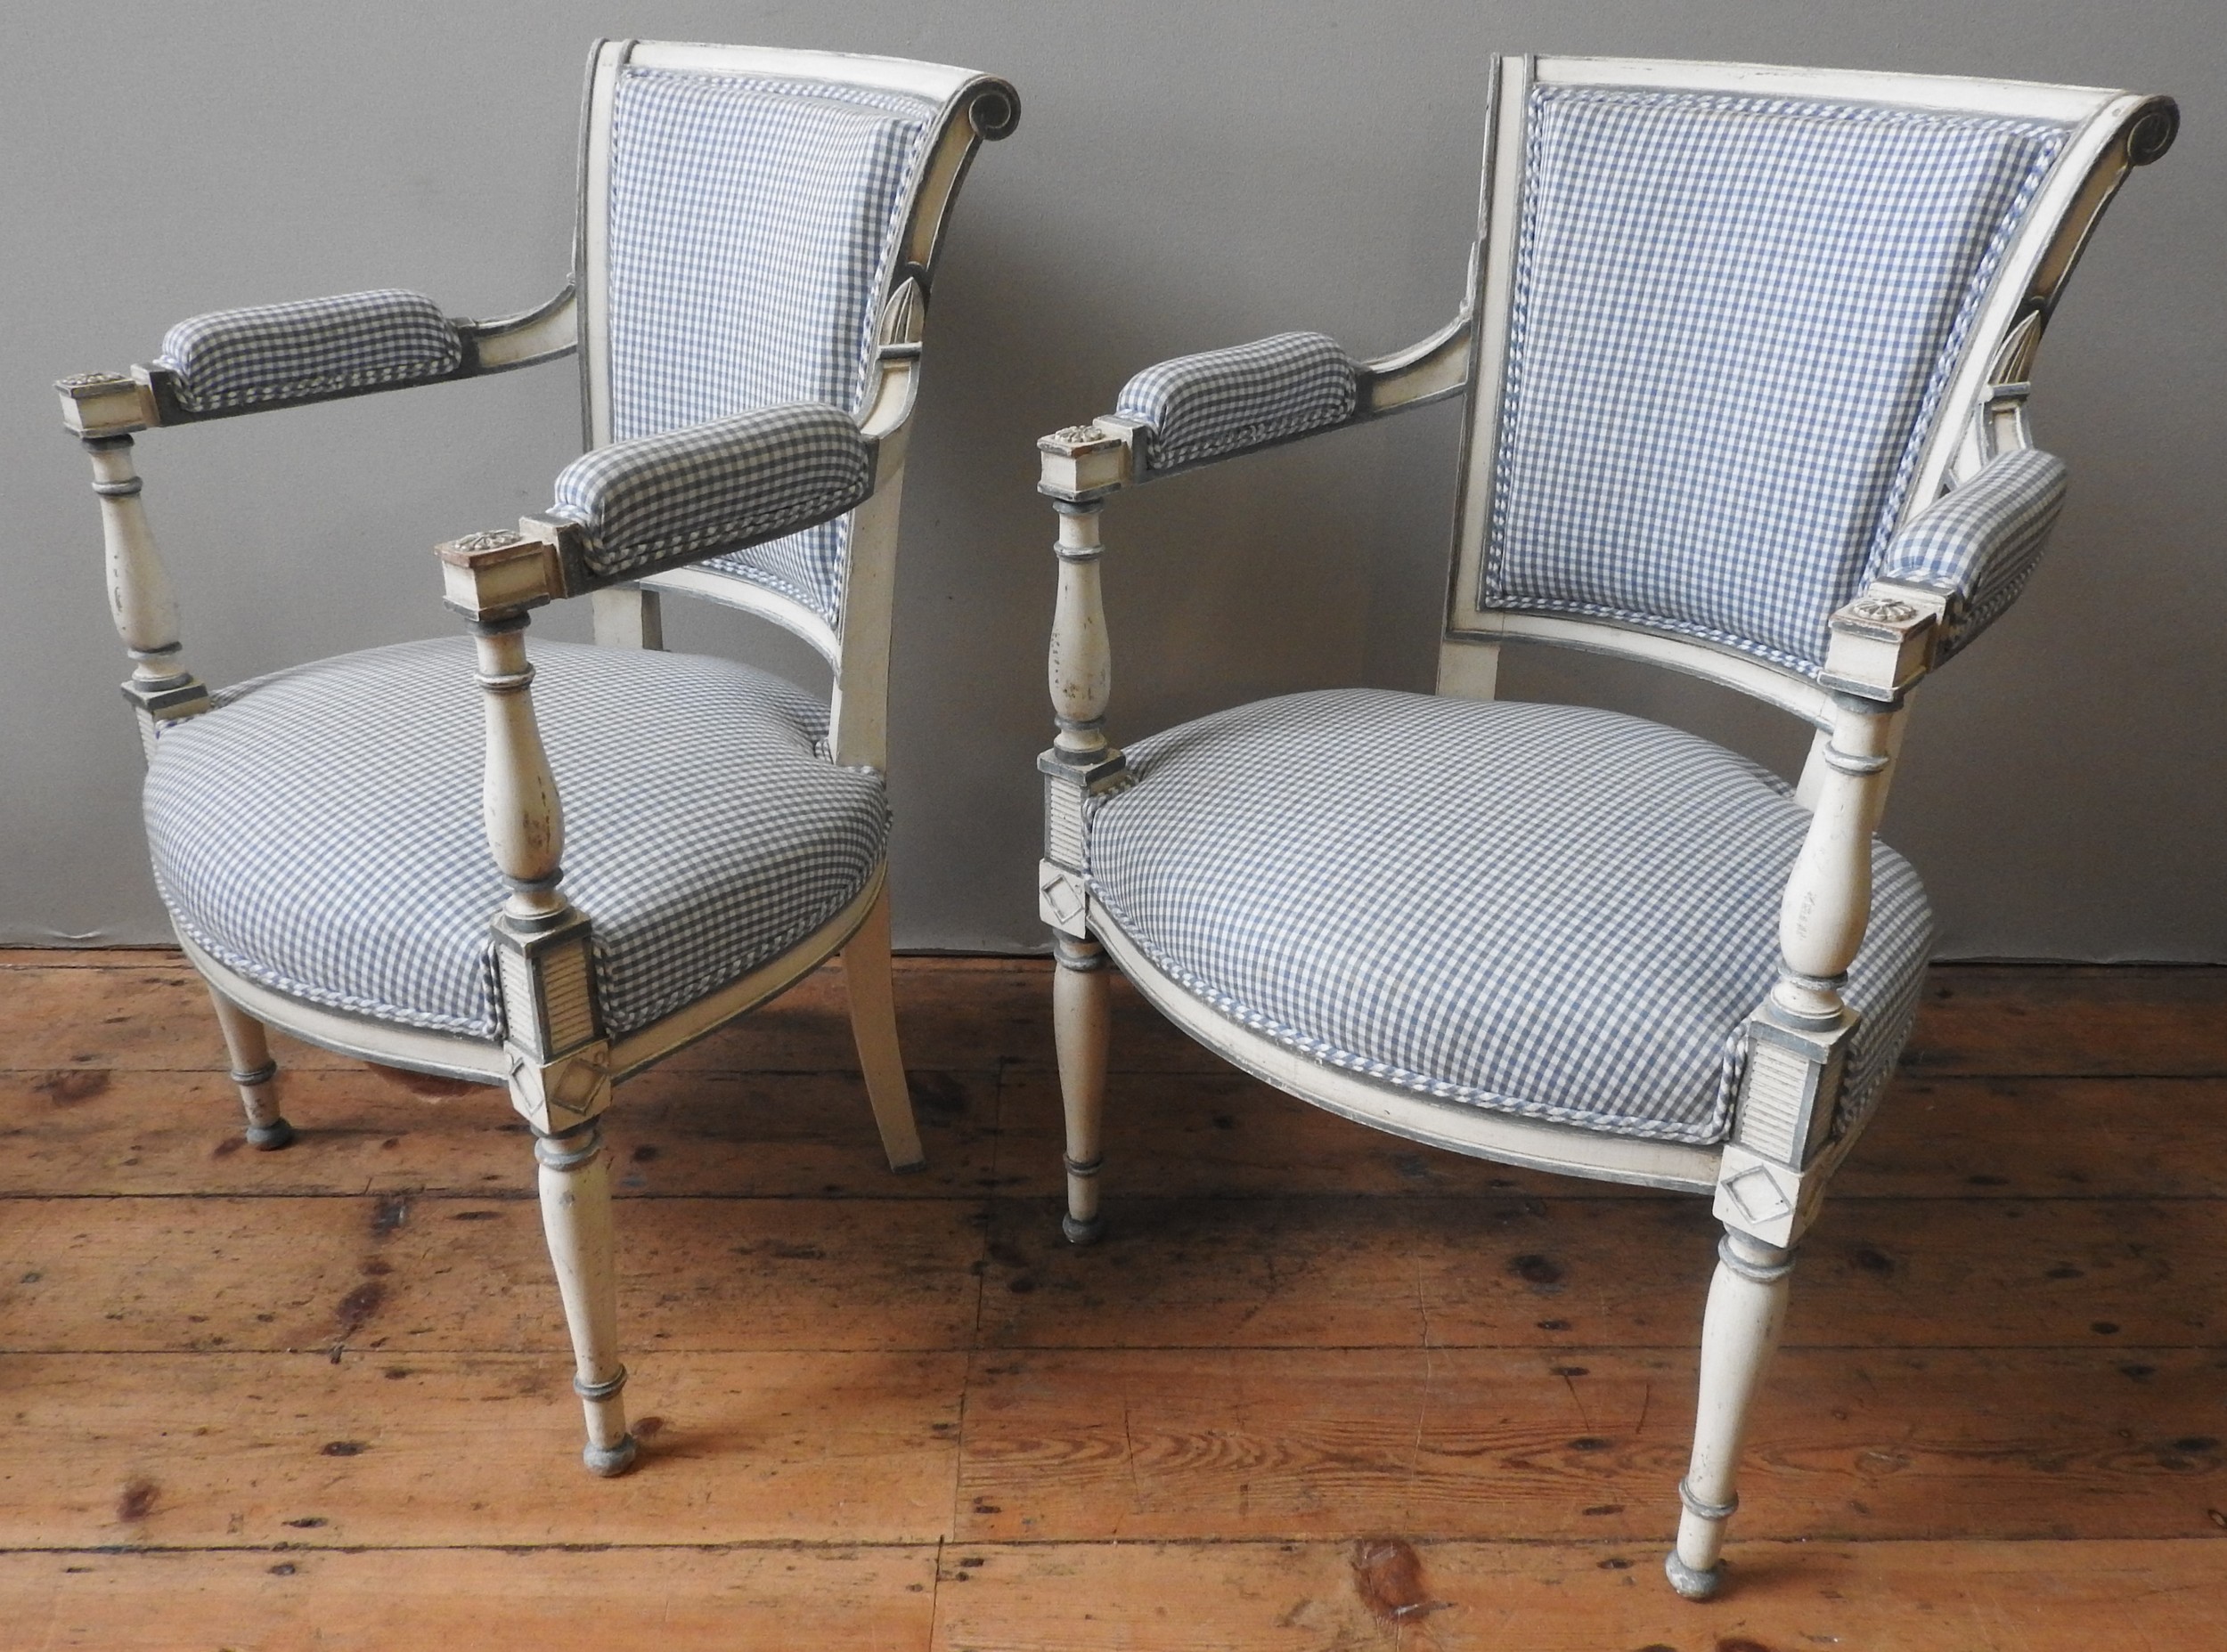 A PAIR OF VINTAGE FRENCH FAUTEUILS, LATE 19TH / EARLY 20TH CENTURY, elegant cream painted frames - Image 2 of 2